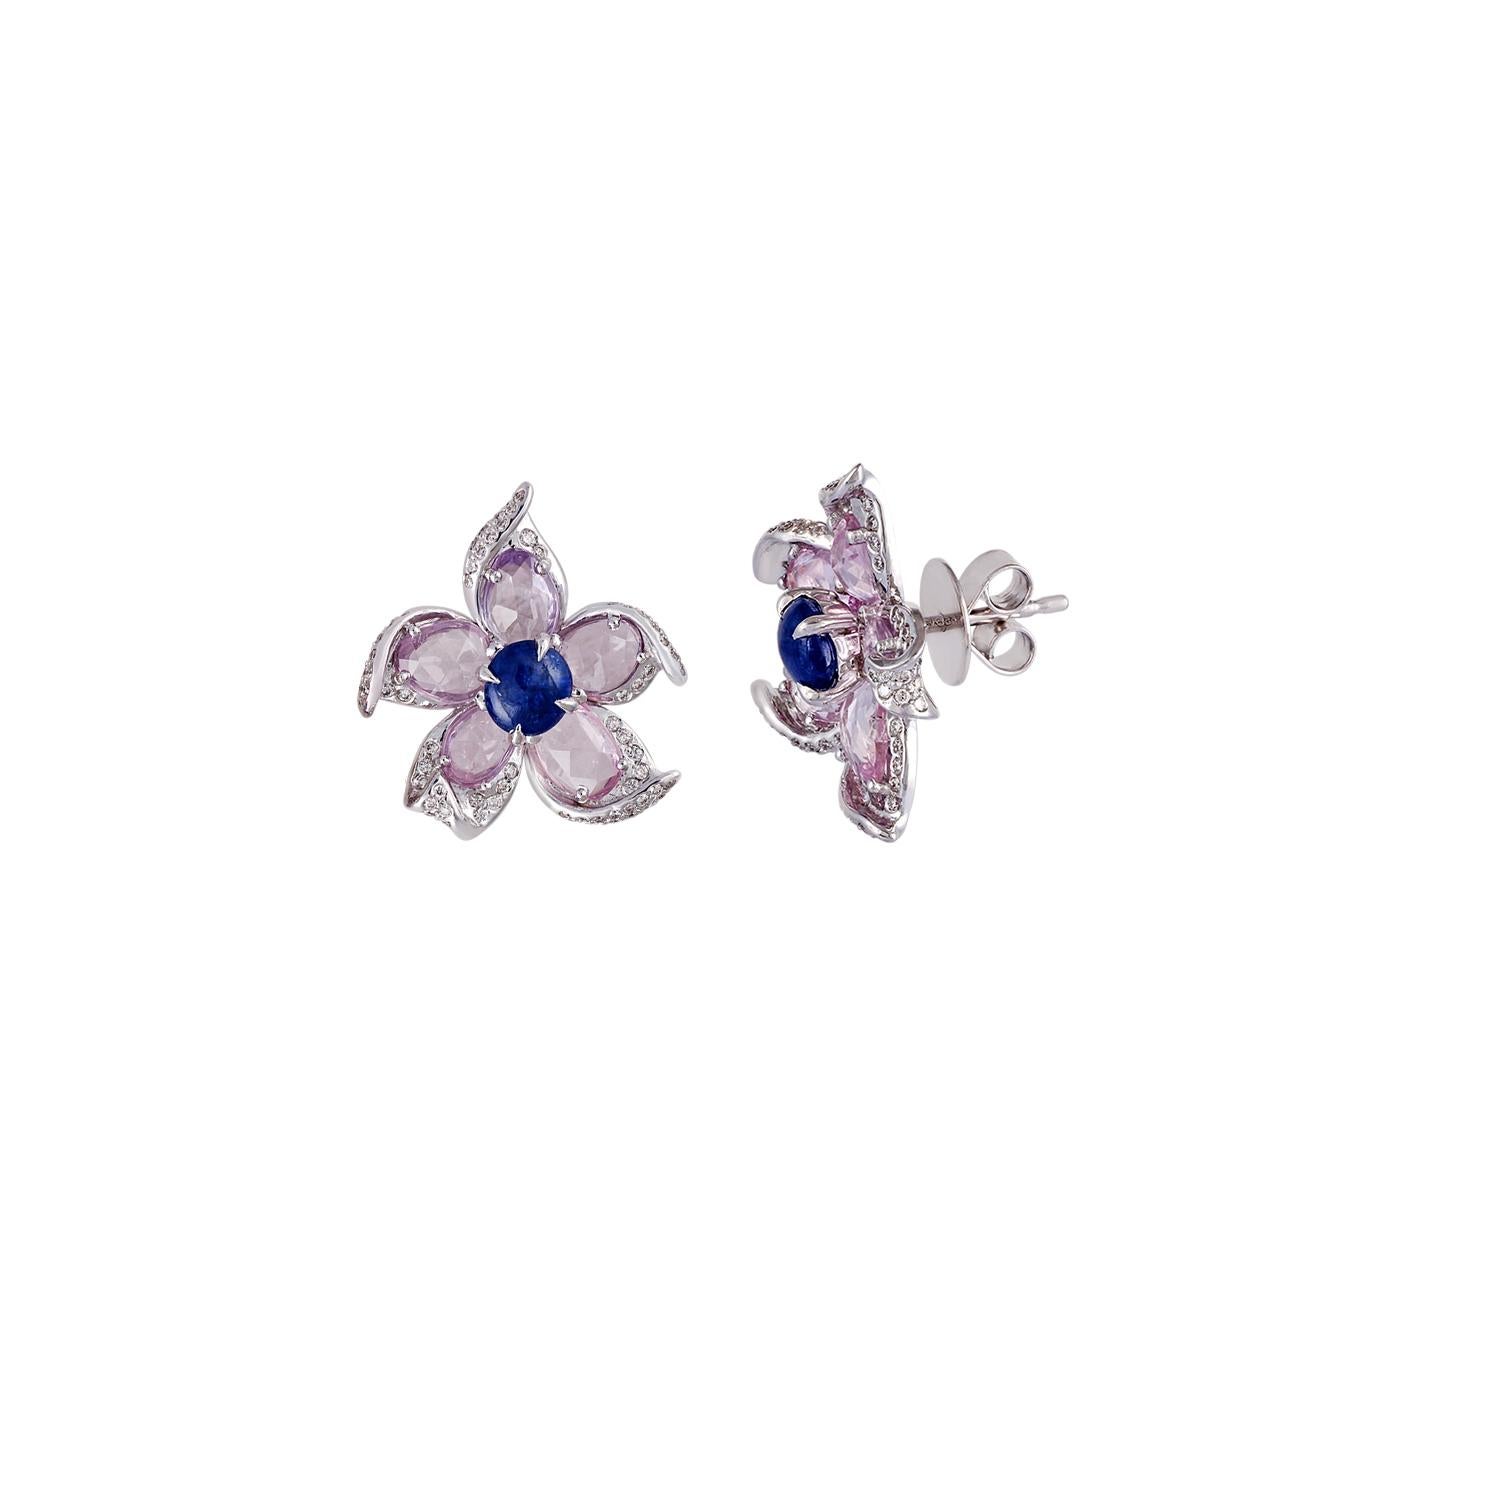 Contemporary Blue Sapphire, Pink Sapphire & Diamond Earrings Studded in 18k Gold